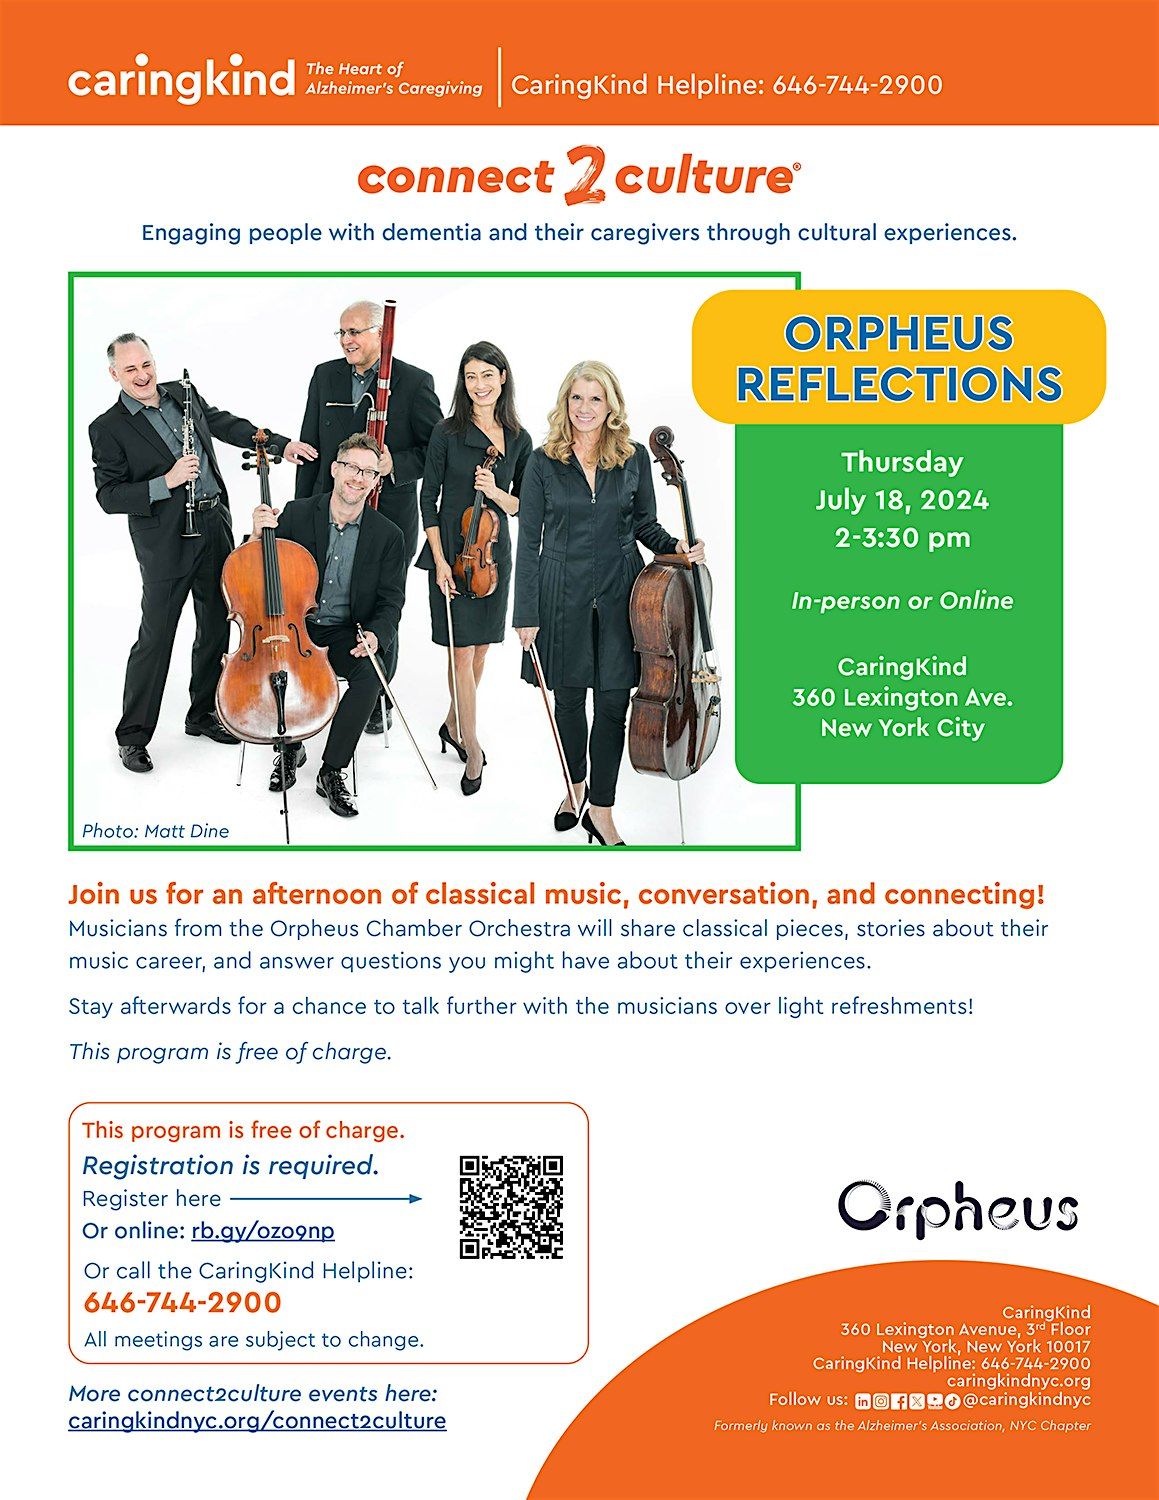 Orpheus Reflections at CaringKind